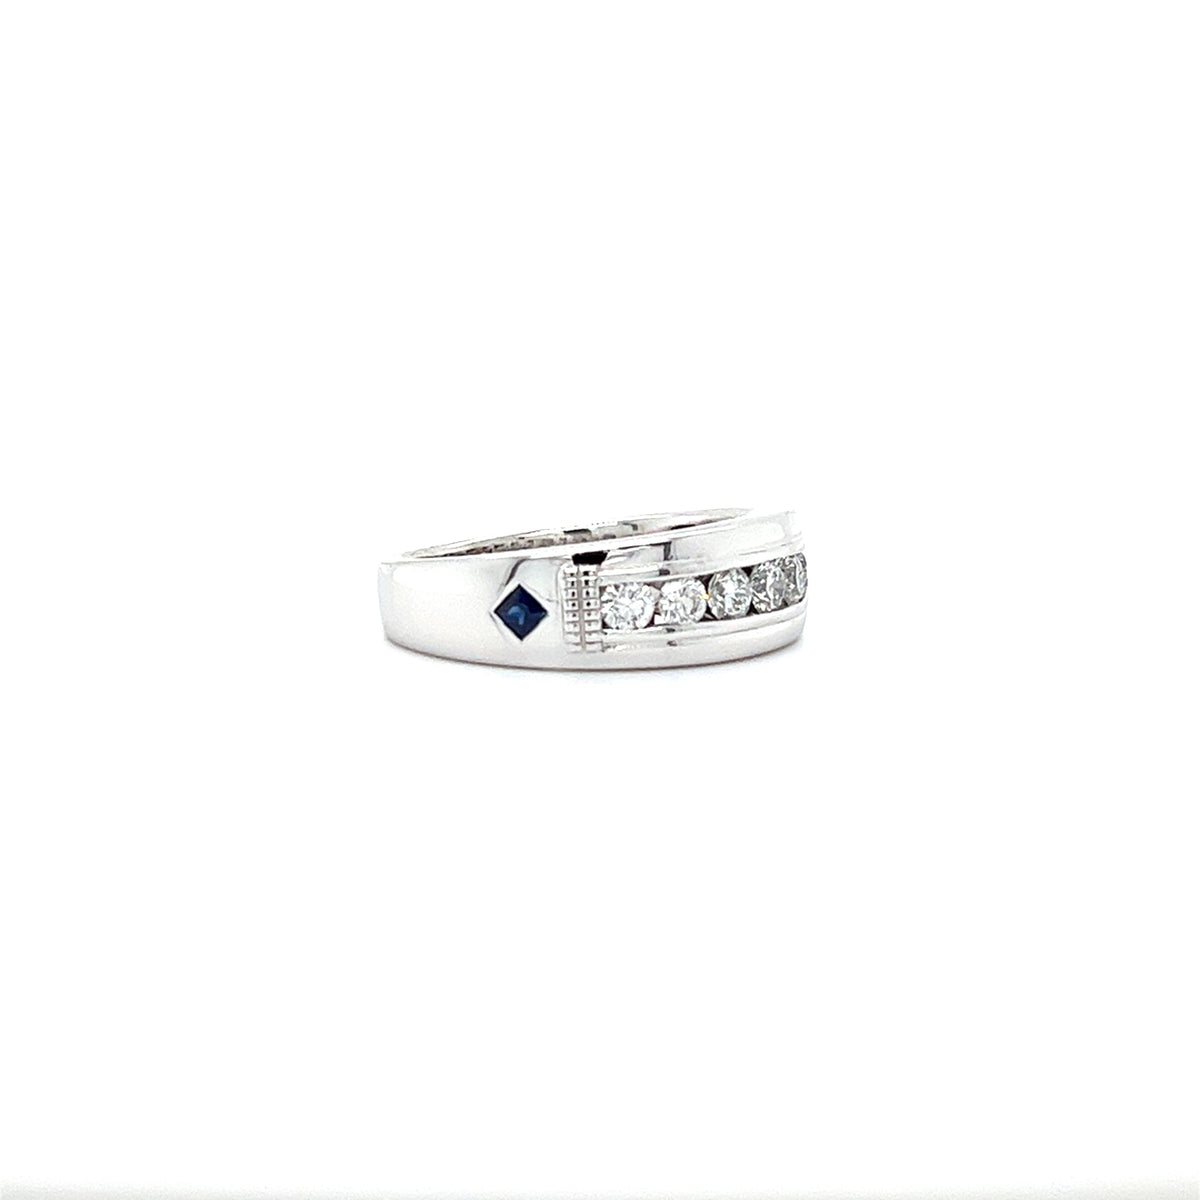 14KT WHITE GOLD DIAMOND AND SAPHIRE WEDDING RING